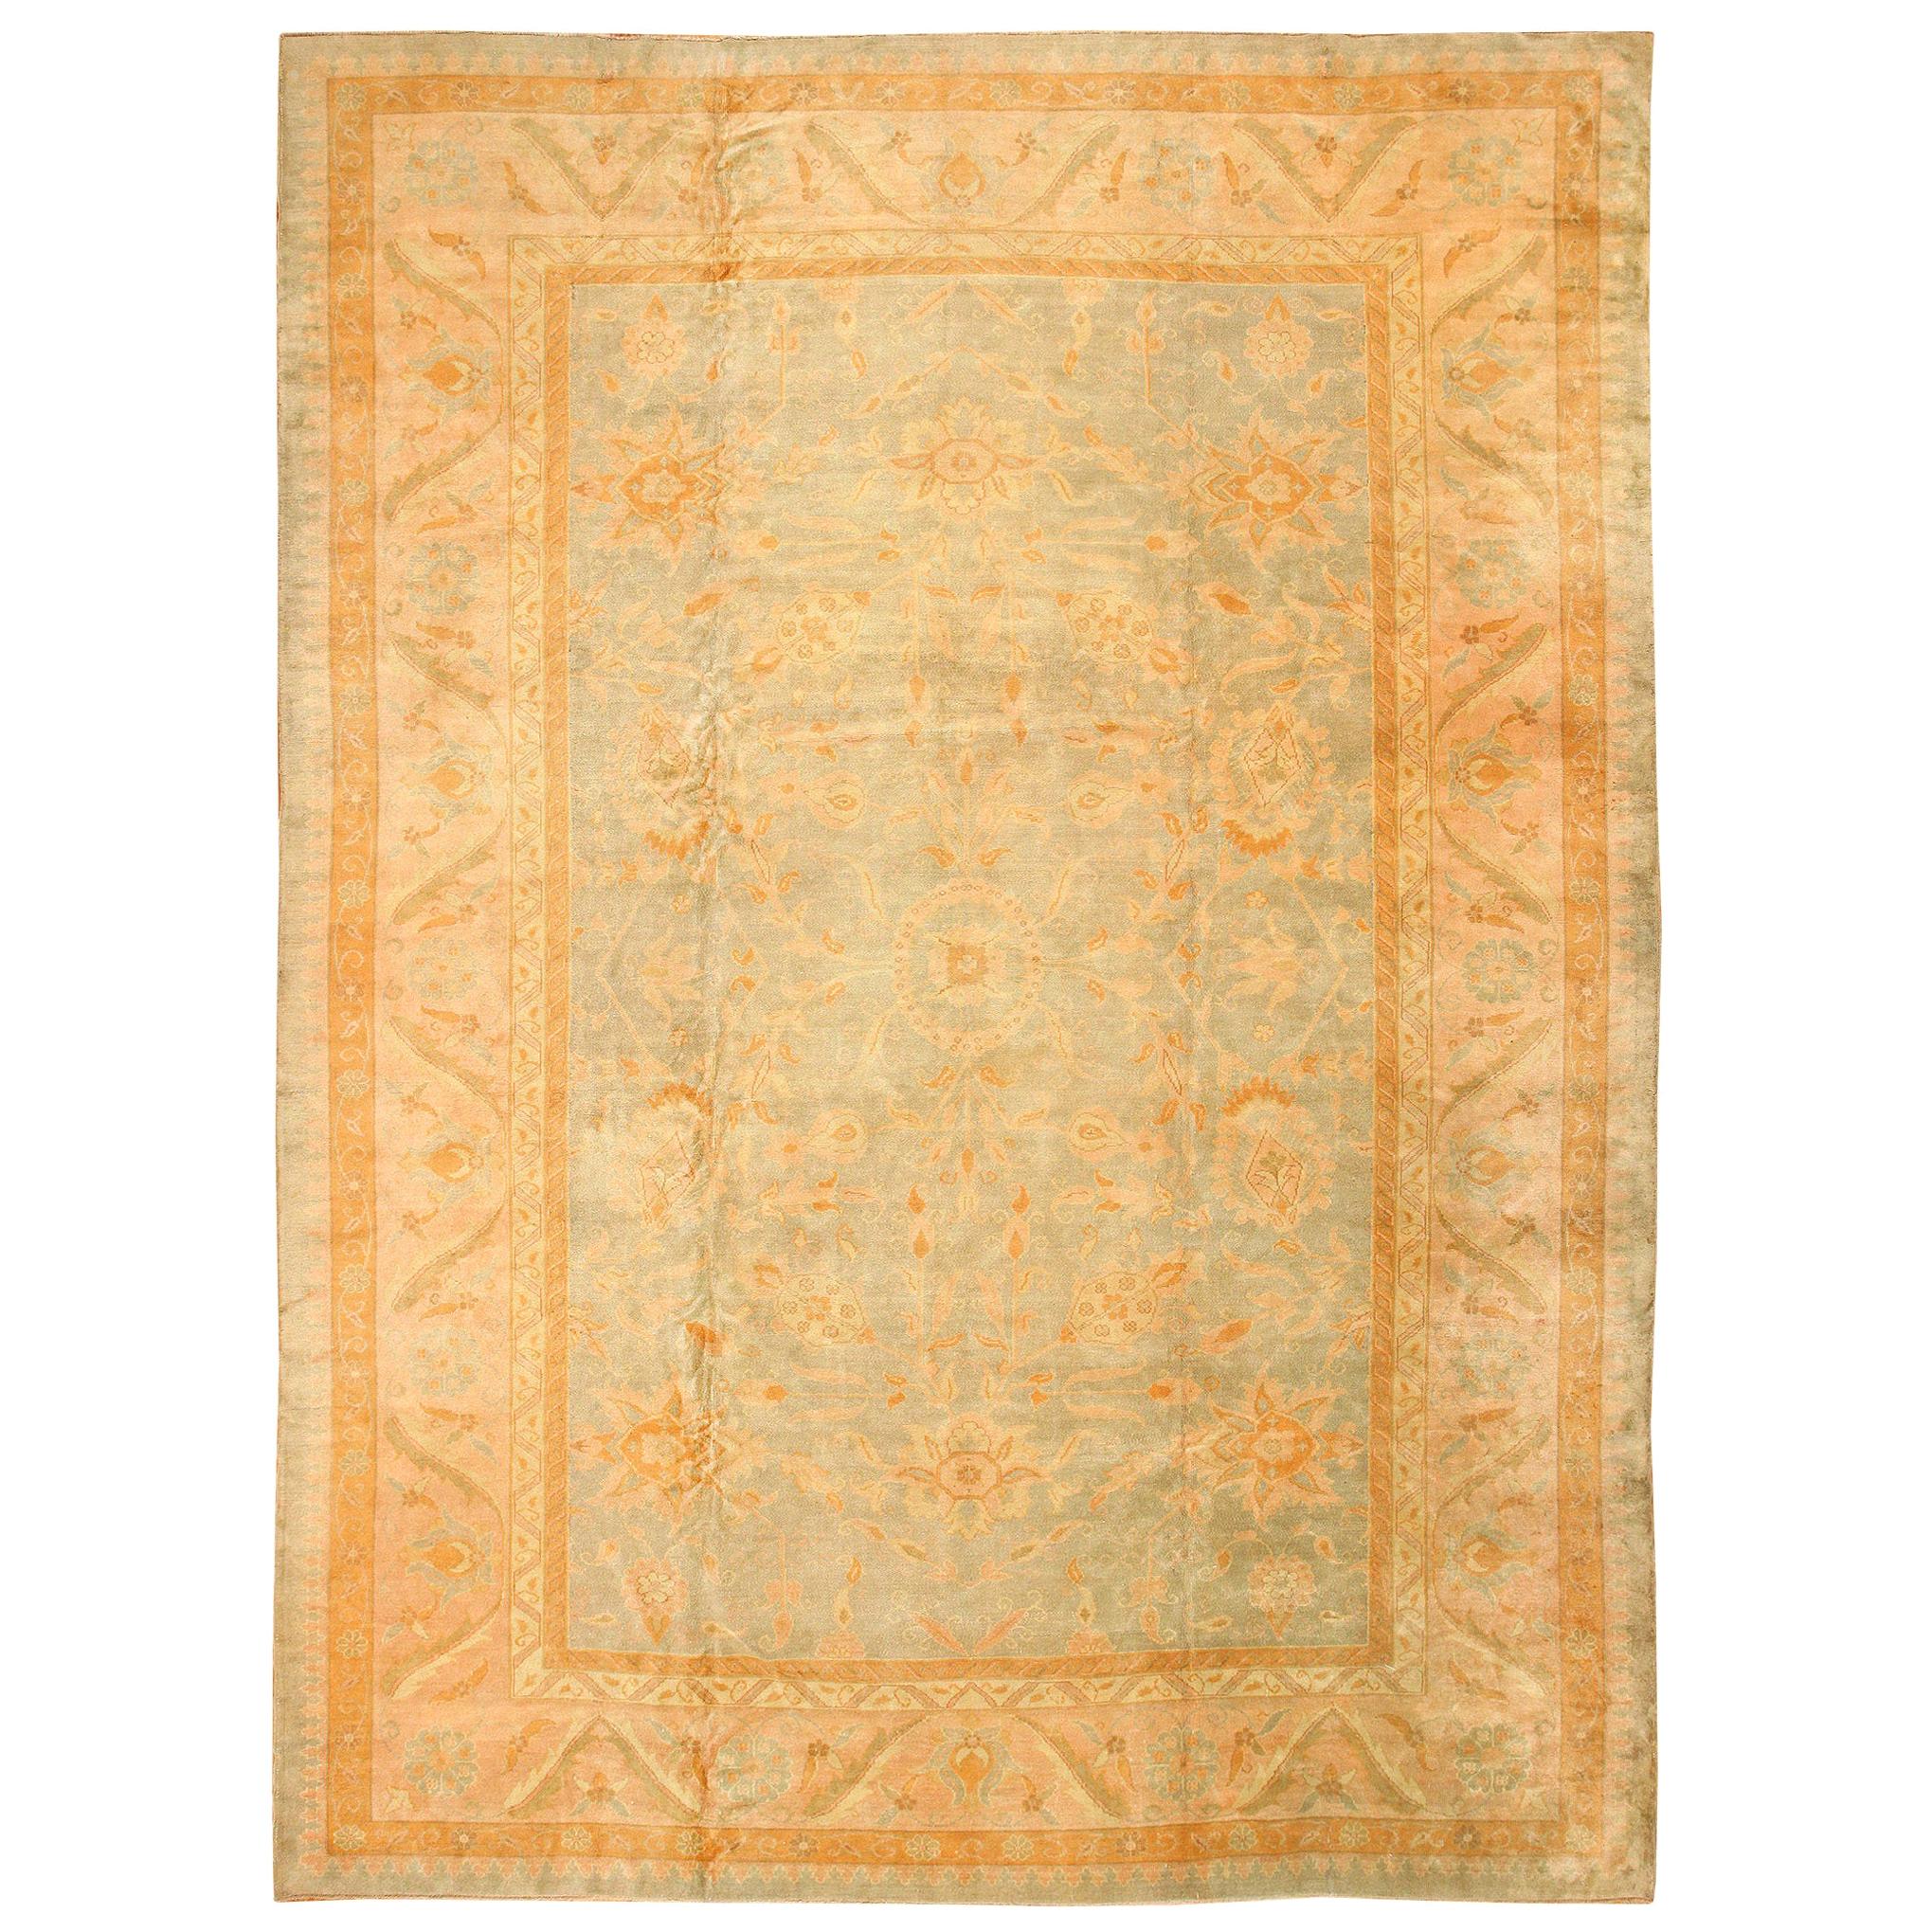 Decorative Large Antique Turkish Rug. Size: 11 ft x 15 ft 3 in (3.35 m x 4.65 m)